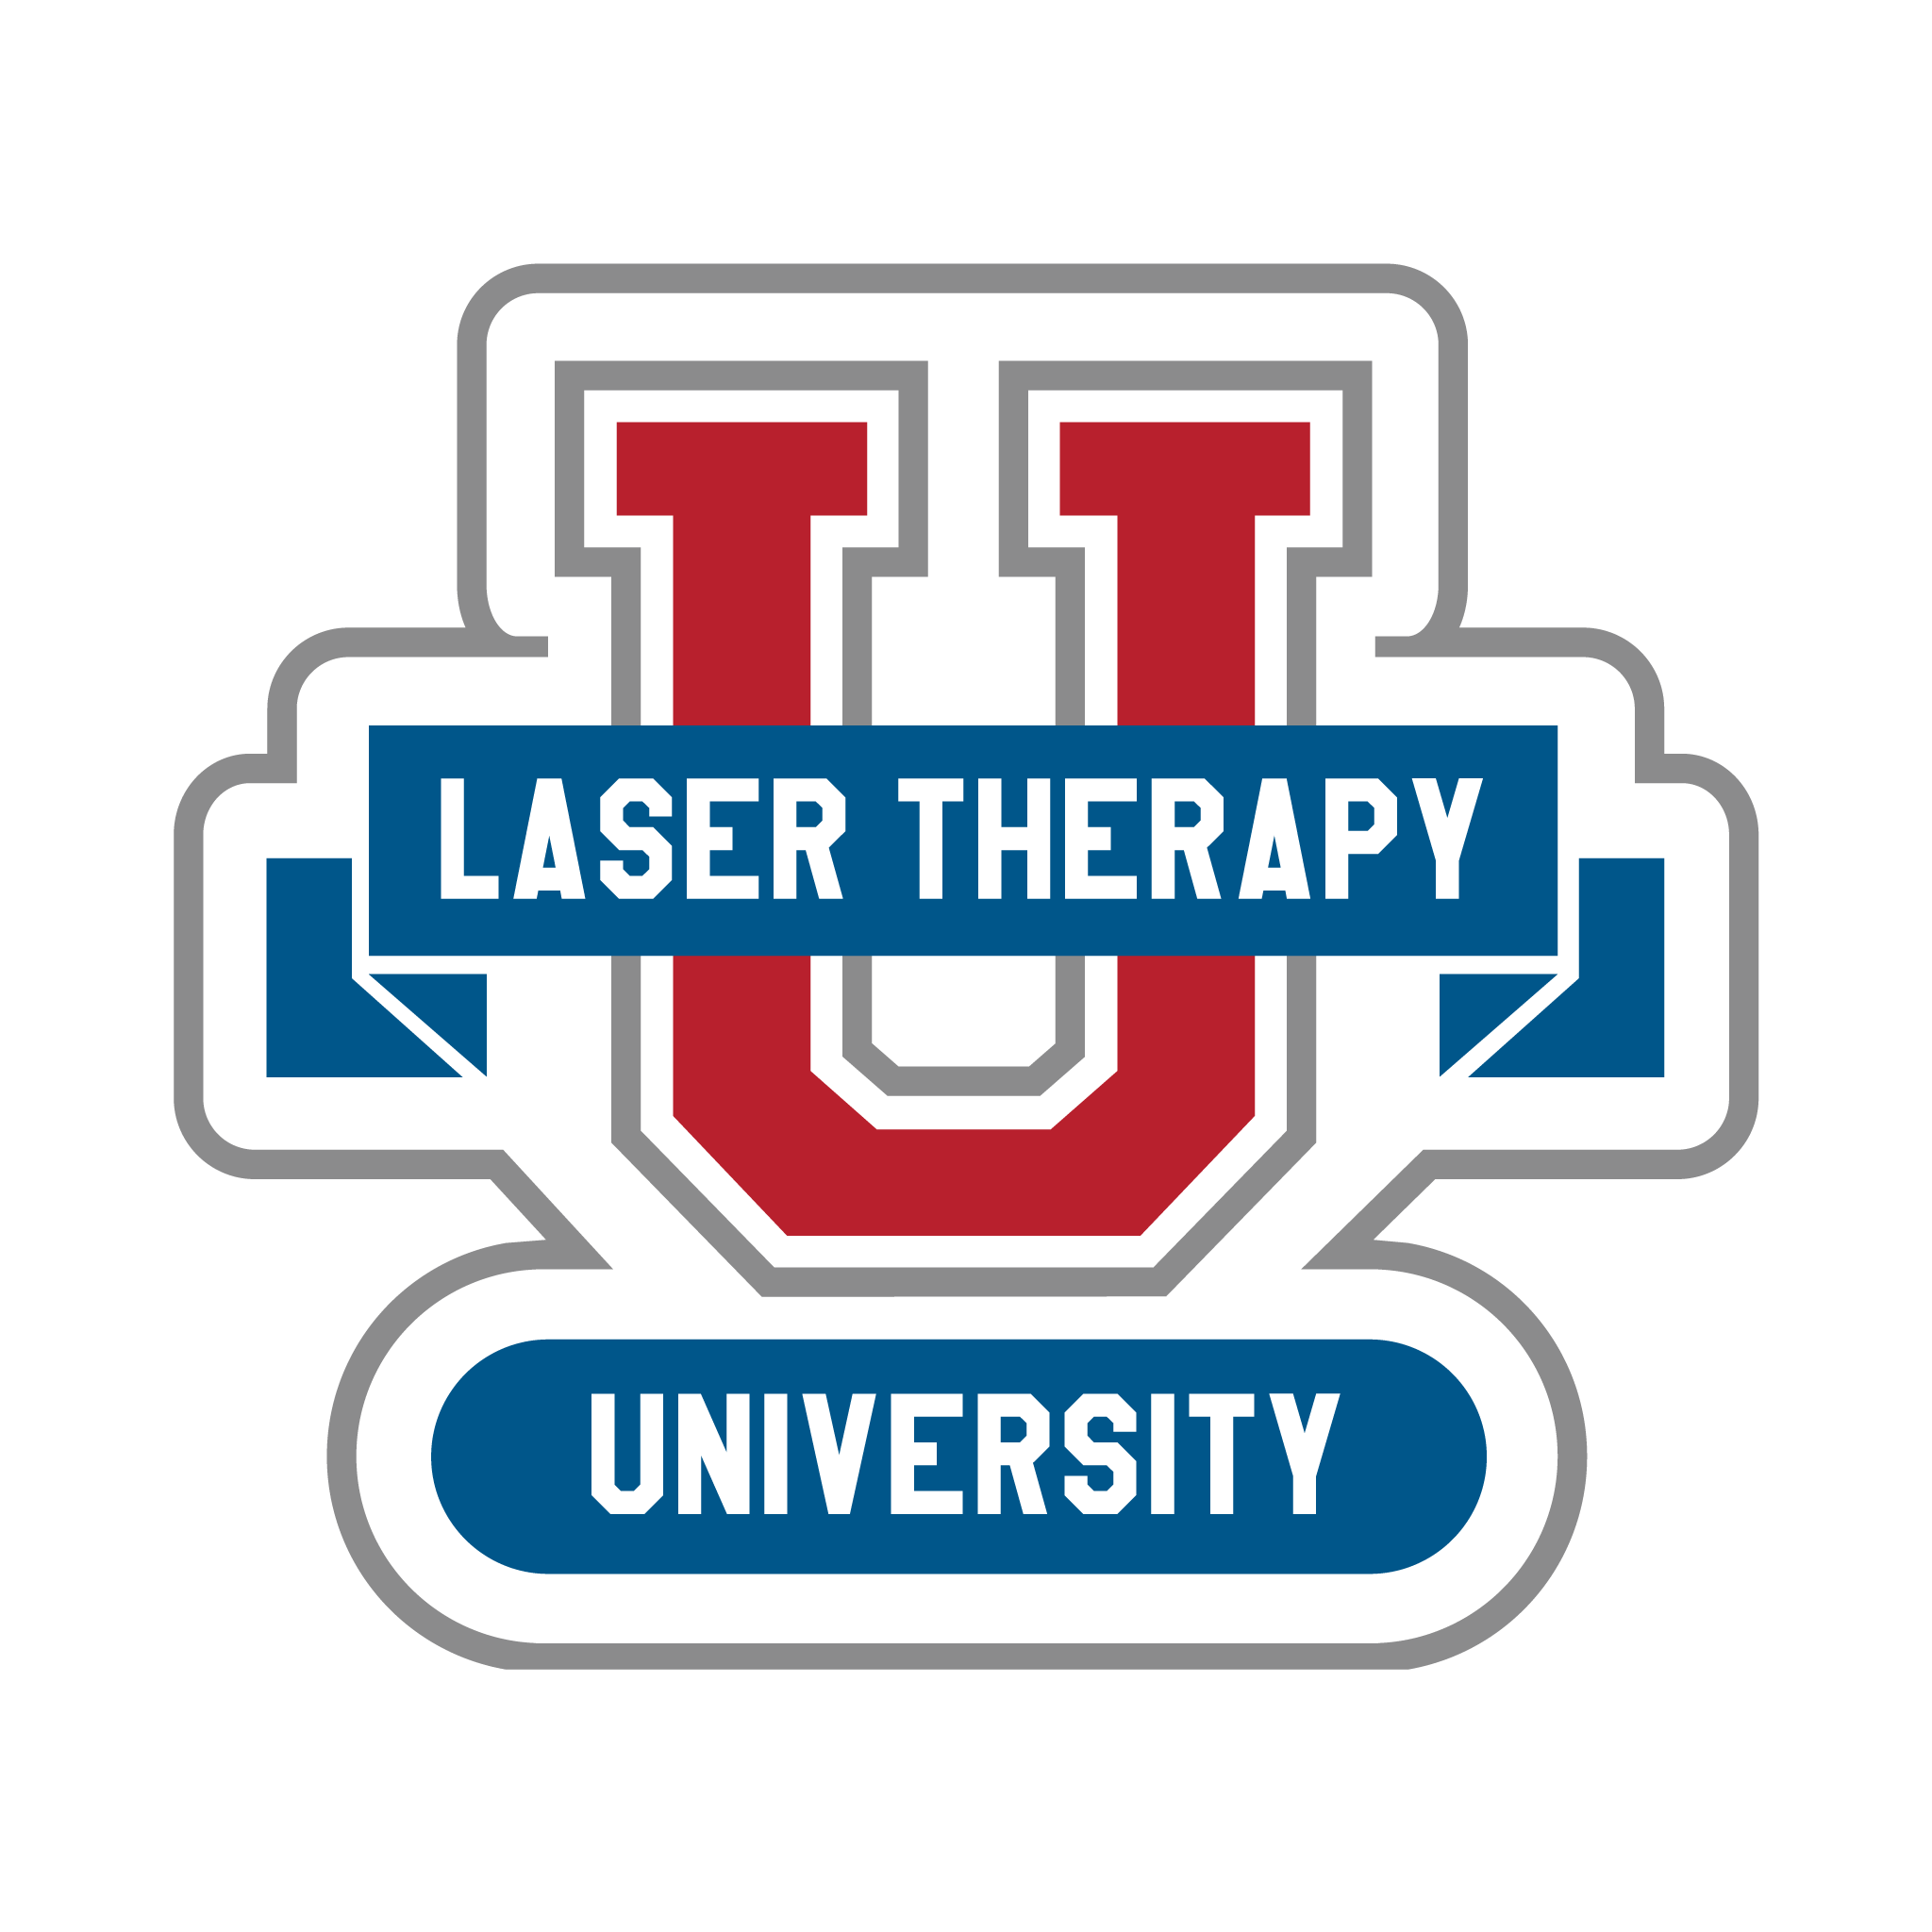 Laser Therapy University